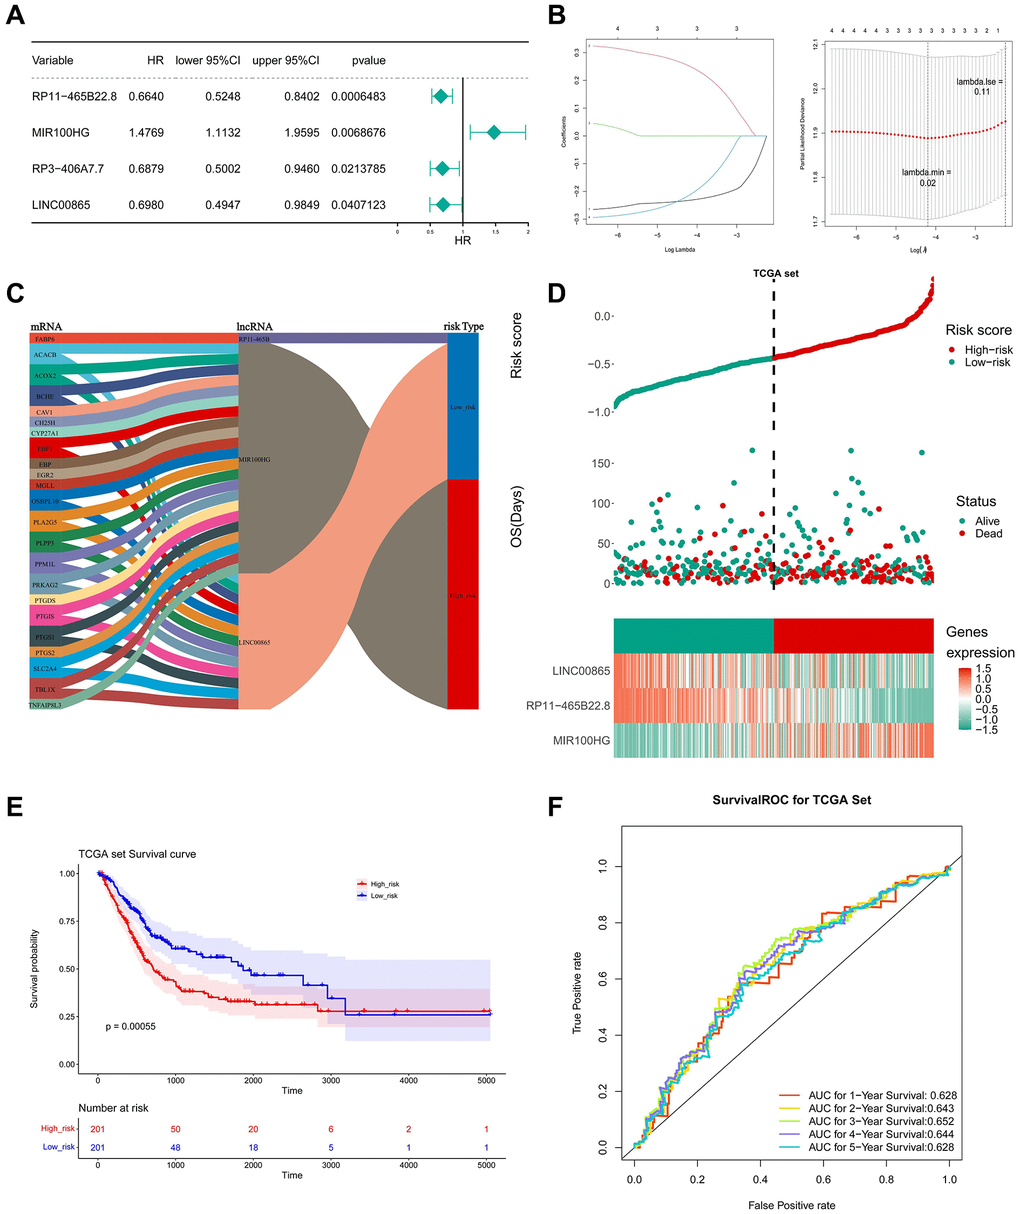 Construction and evaluation of LMRLs-based prognostic signature. (A) The LMRLs associated with the prognosis of BLCA patients were extracted by univariate Cox regression analysis. (B) LASSO regression analysis reserved 3 prognostic features LMRLs. (C) The Sanberry plot demonstrates lncRNA-mRNA co-expression relationships. (D) Distributions of risk score and survival status of BLCA patients and heatmap of the 3 genes signature in the training set. (E) KM survival curves for high and low-risk groups in the training set. (F) ROC curve of the 3 gene signature for predicting the 1, 3, and 5 years survival in the training set.